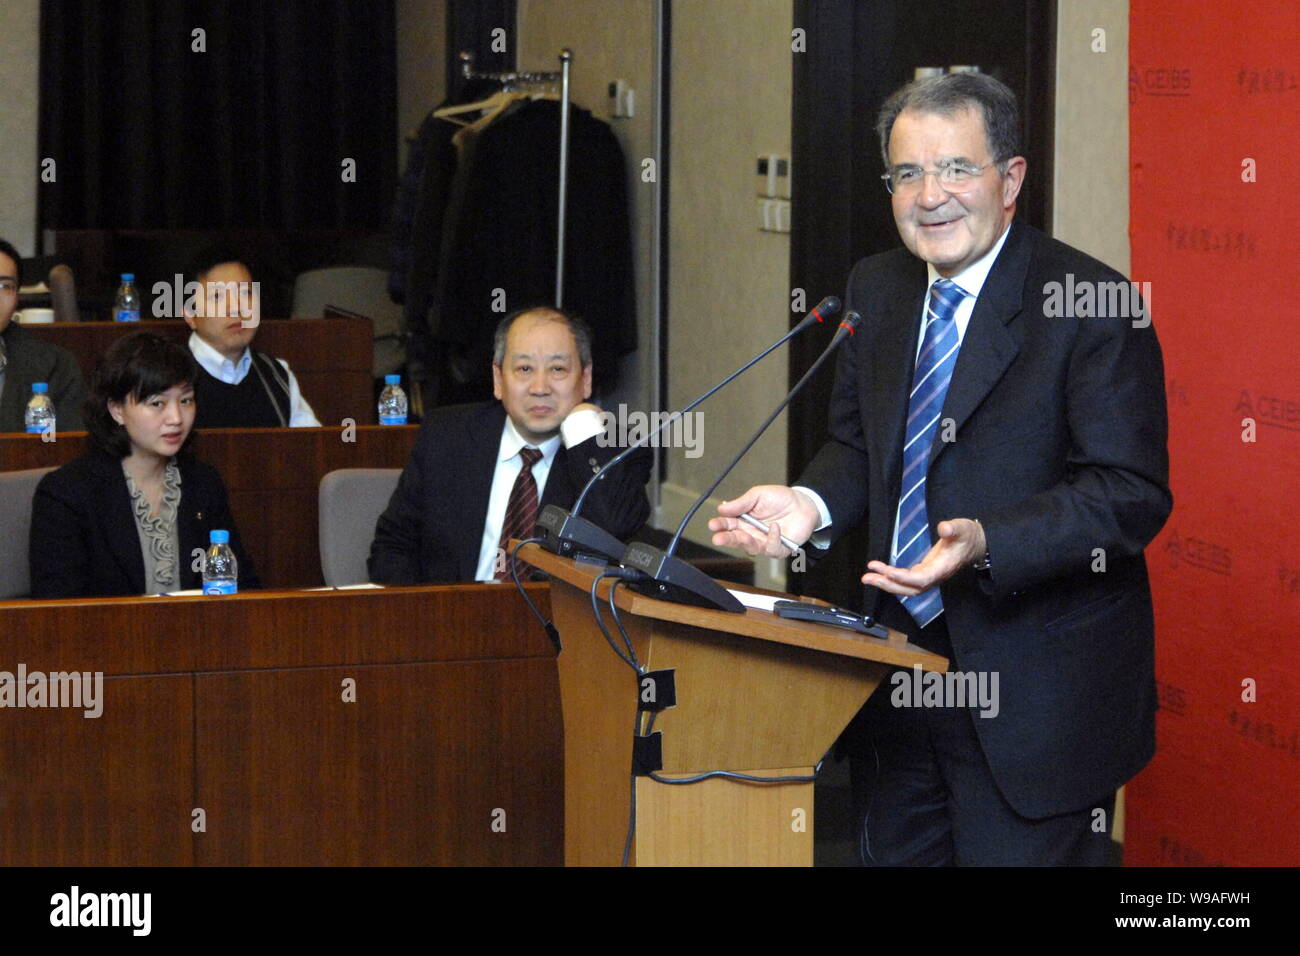 Romano Prodi, former European Commission President and former Italian Prime Minister, speaks during a press conference at CEIBS Lujiazui International Stock Photo